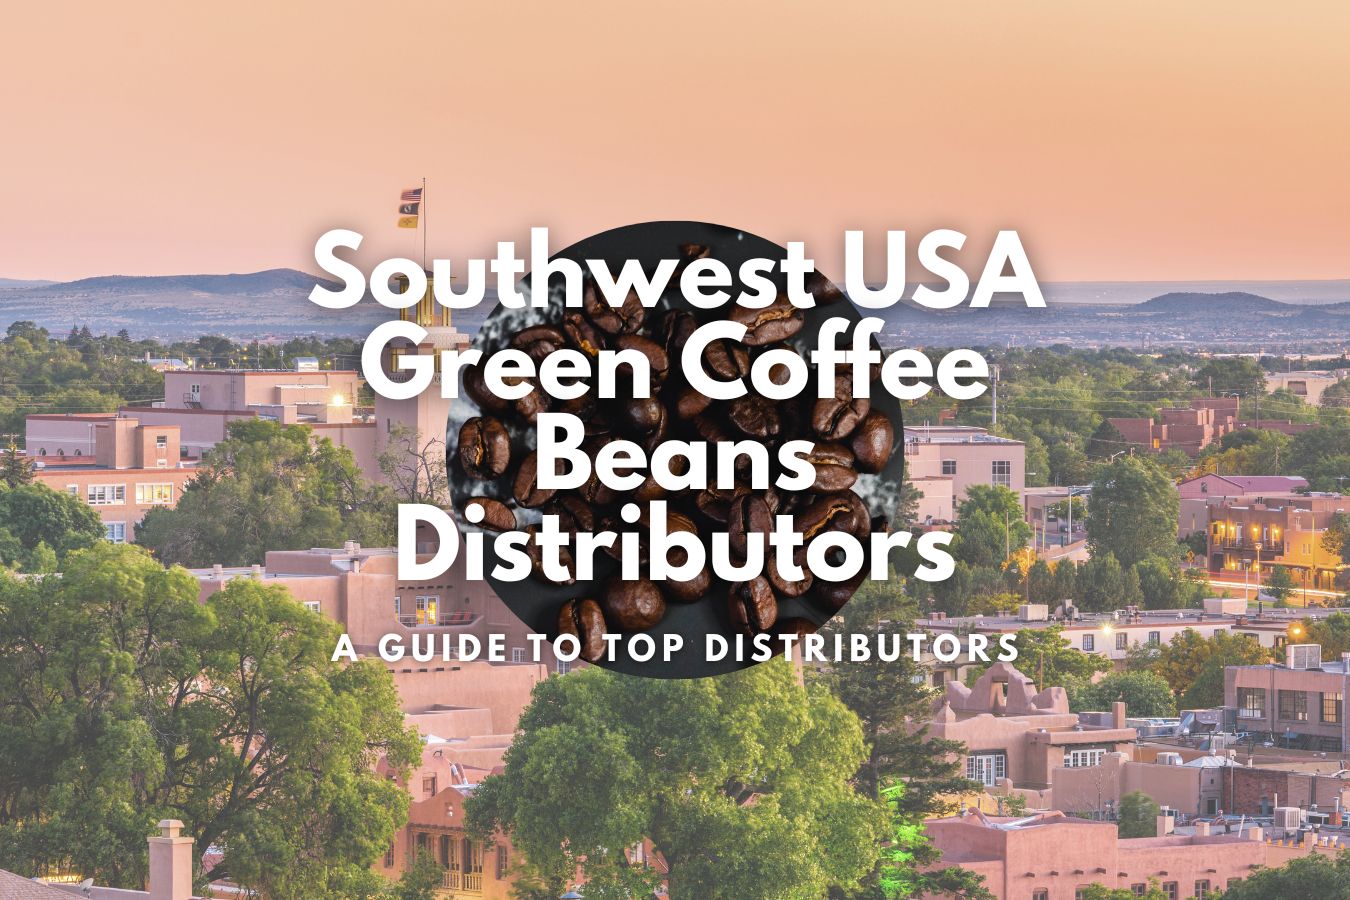 Sourcing the Best Southwest USA Green Coffee Beans Distributors A Guide to Top Distributors